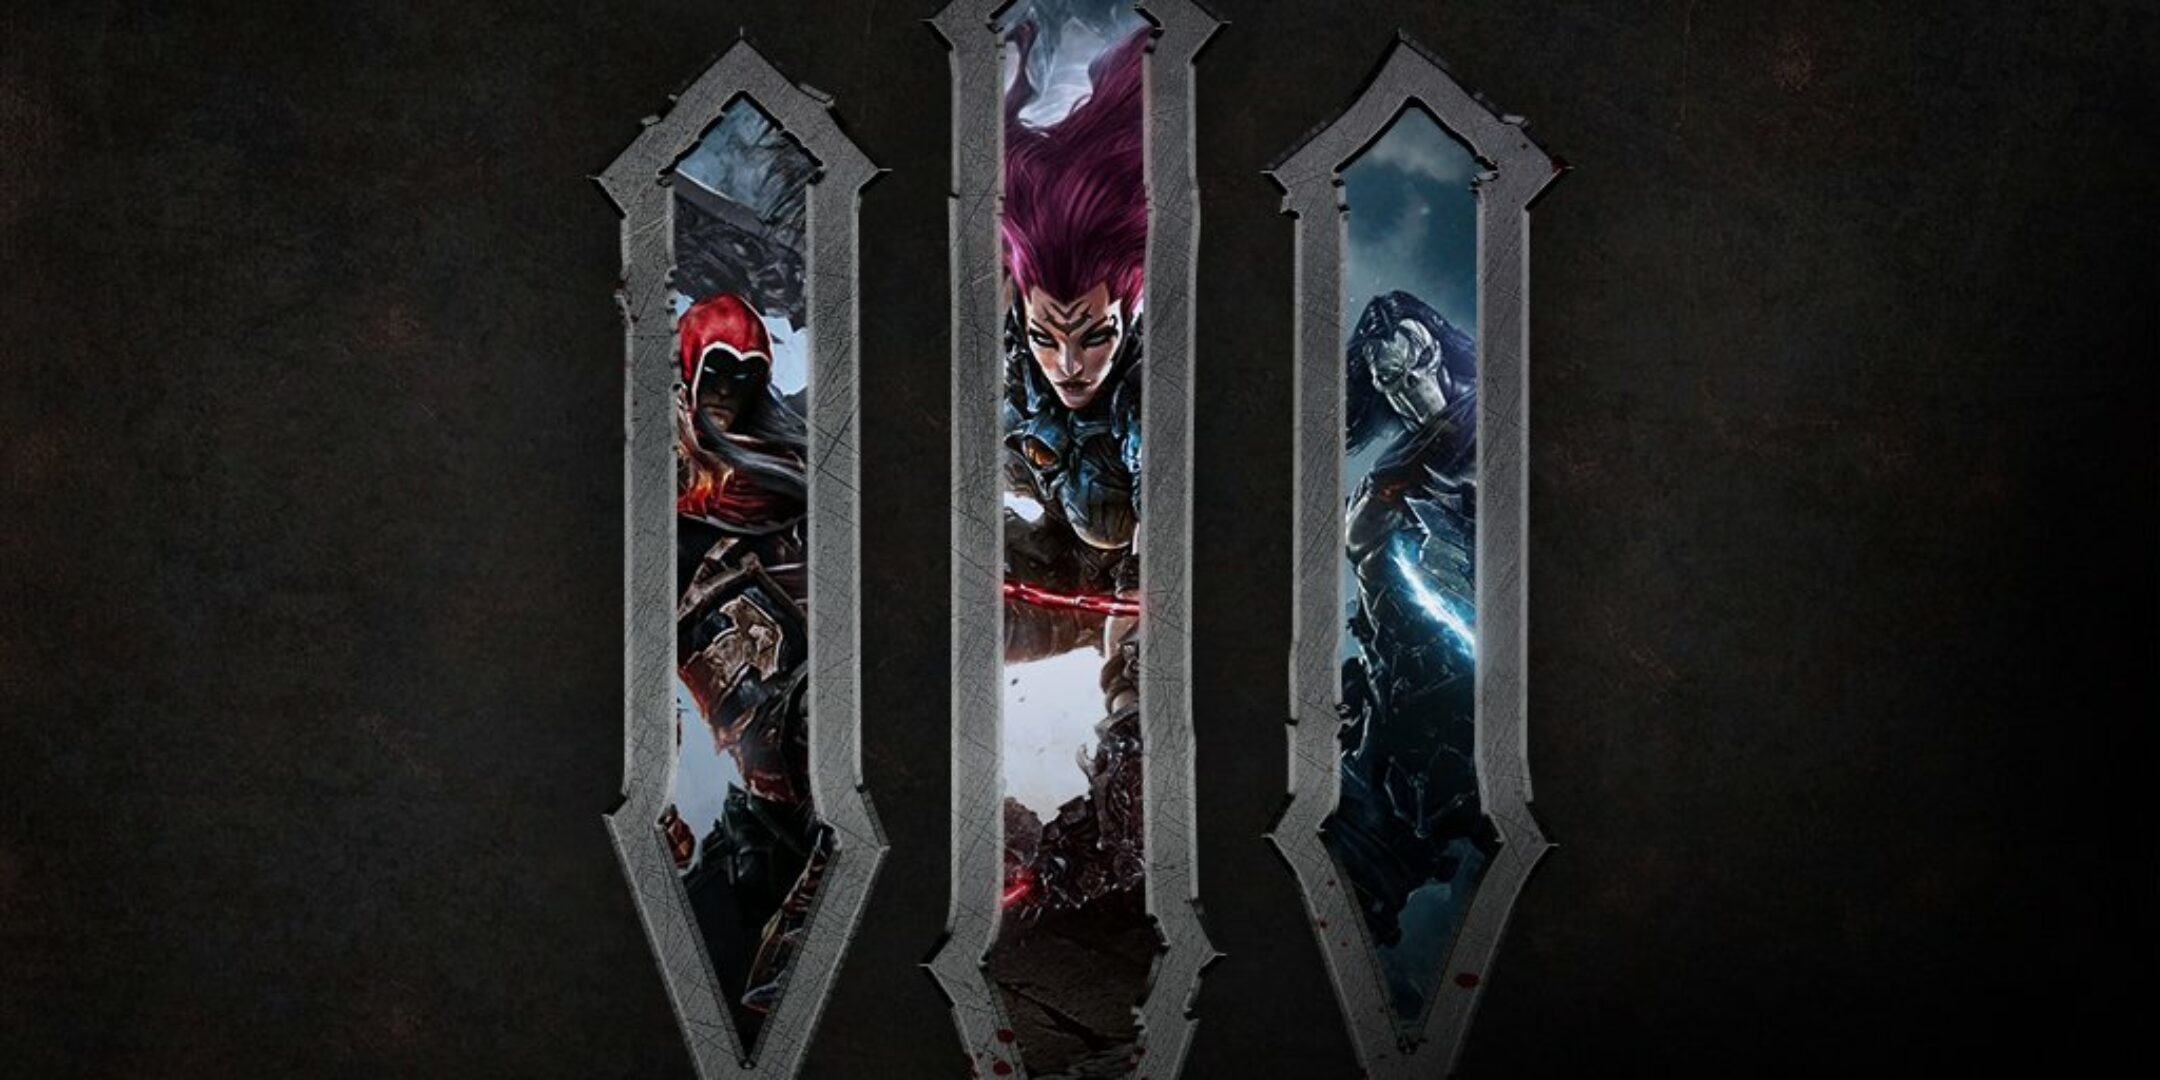 Official Reveal Trailer for Darksiders III Revealed